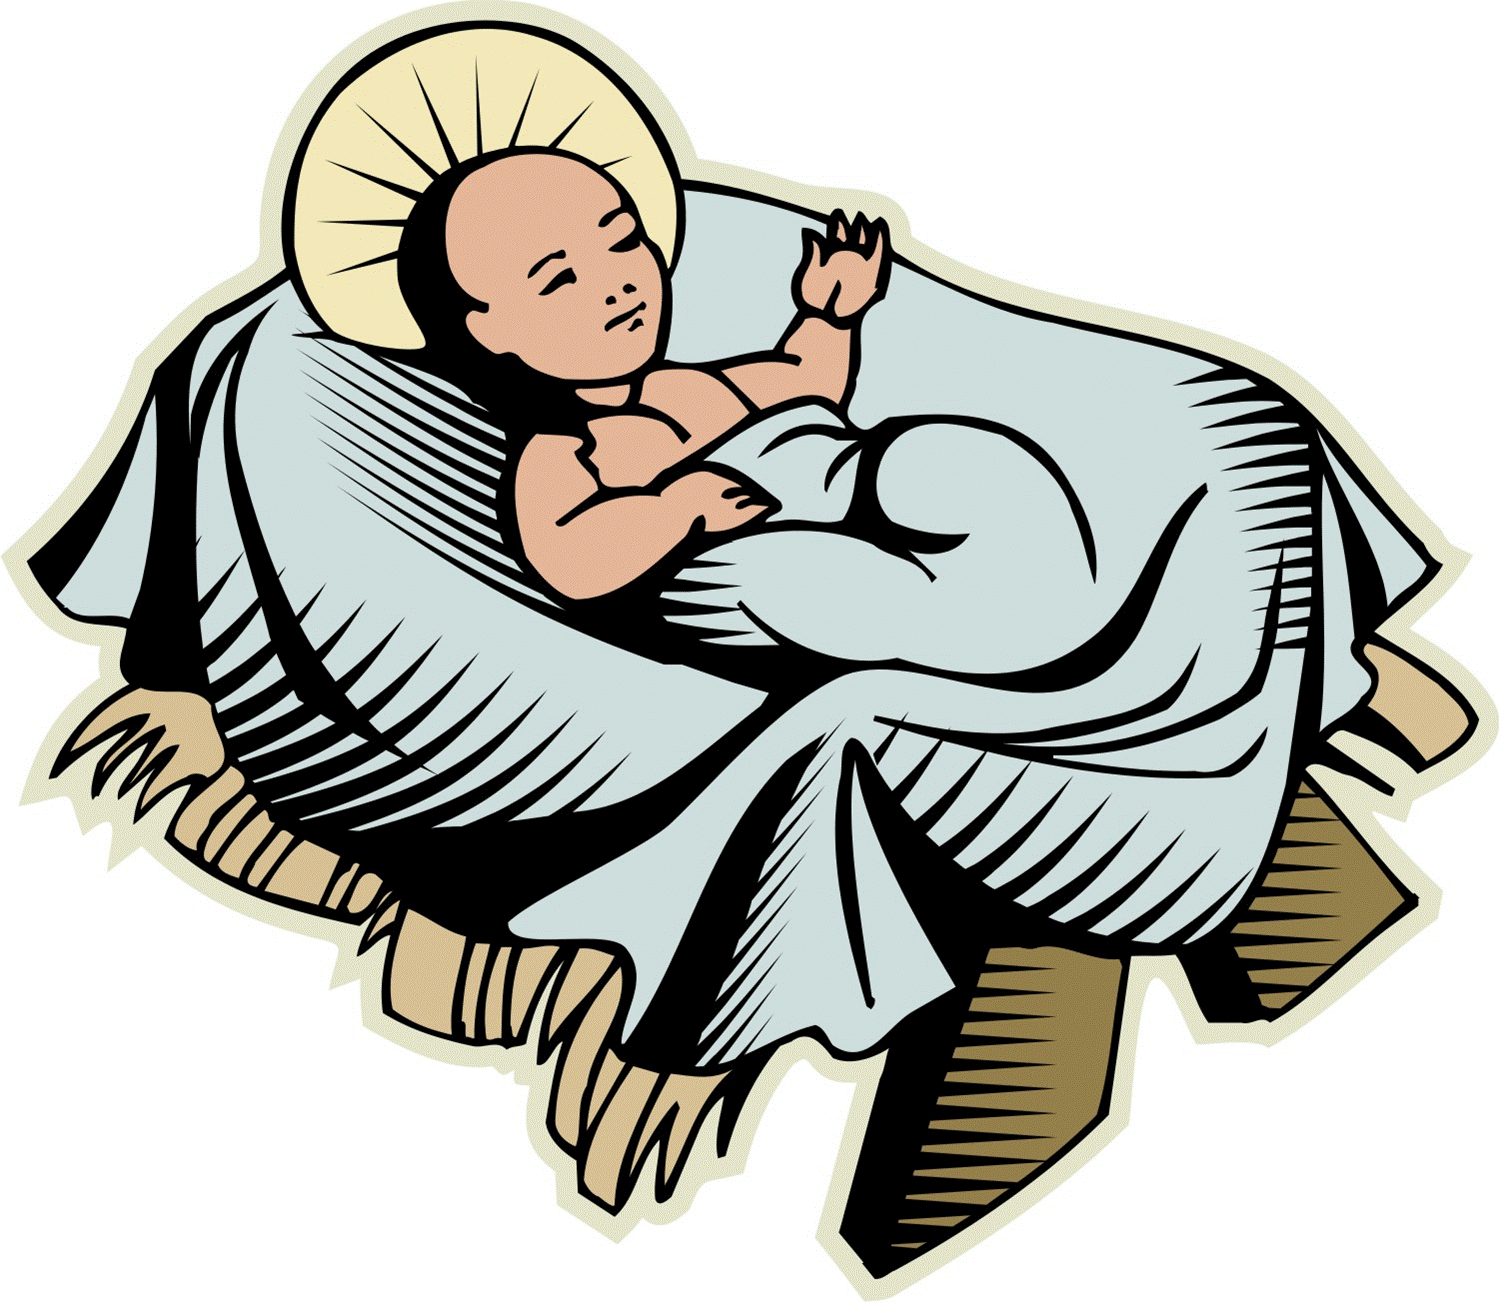 Free trial for baby stuff, free baby jesus clipart